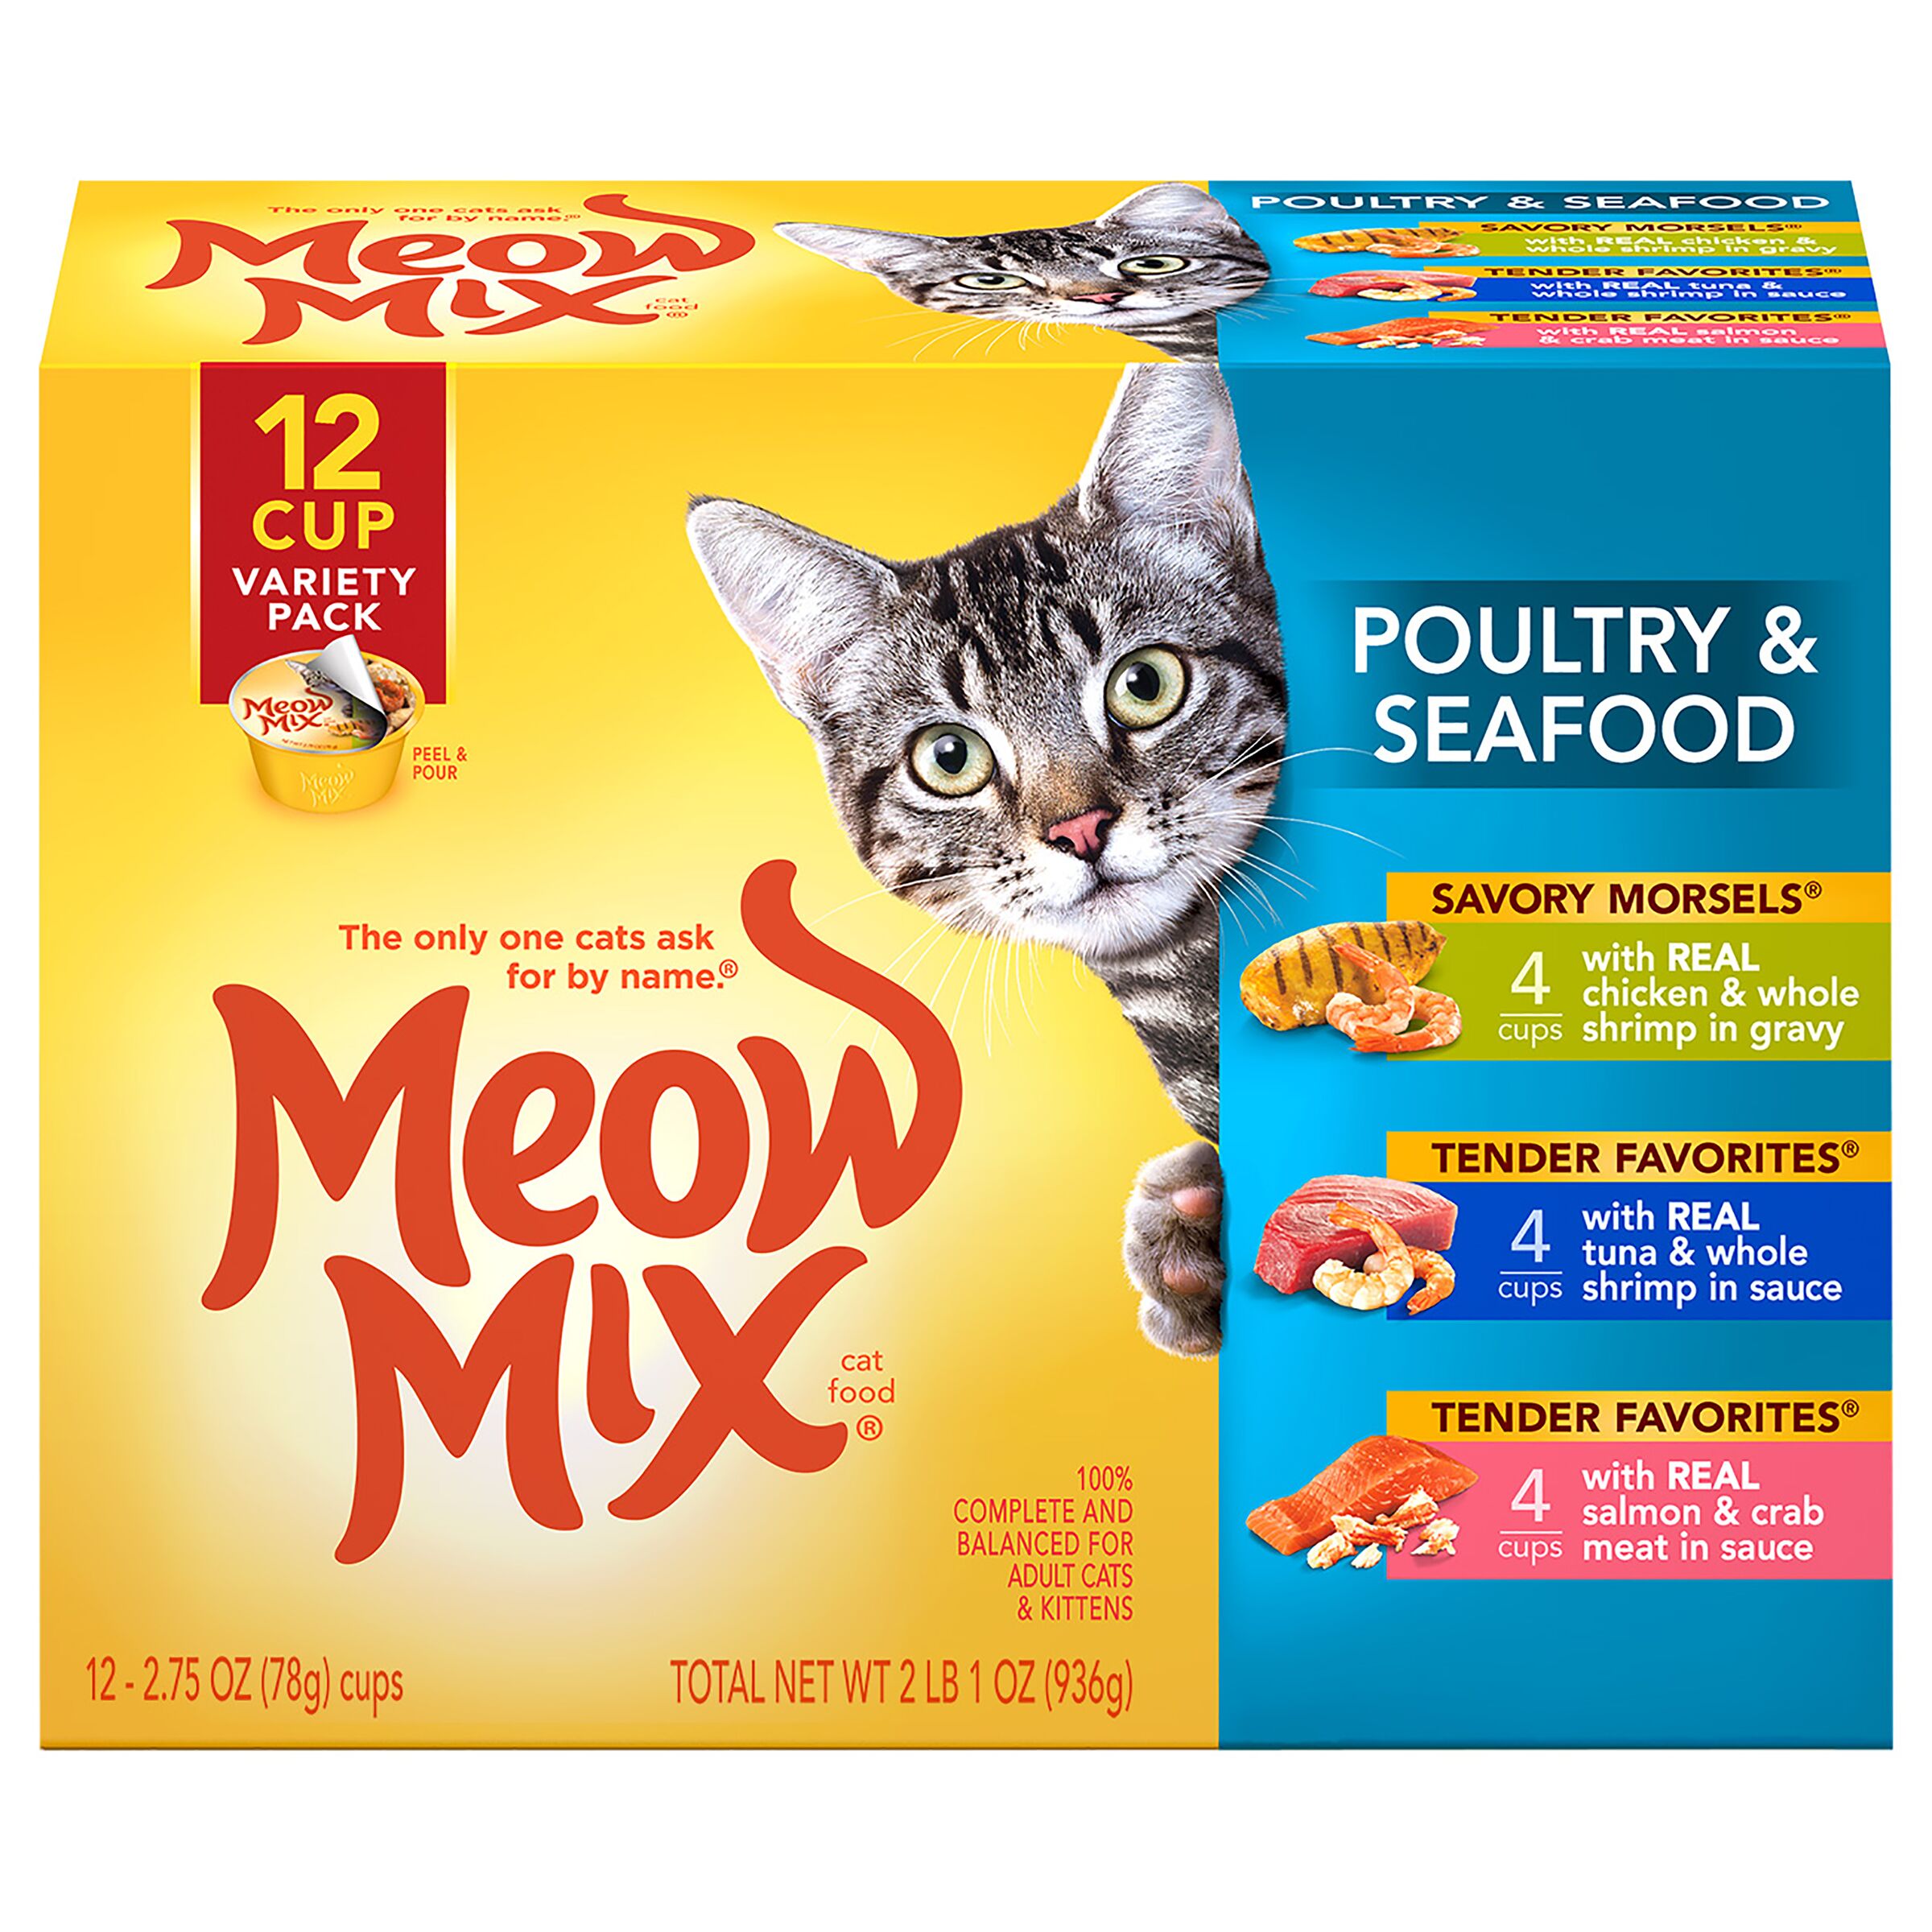 Meow Mix Poultry and Seafood Wet Cat Food Variety Pack, 2.75-Ounce Cups, Pack of 12 - image 1 of 7